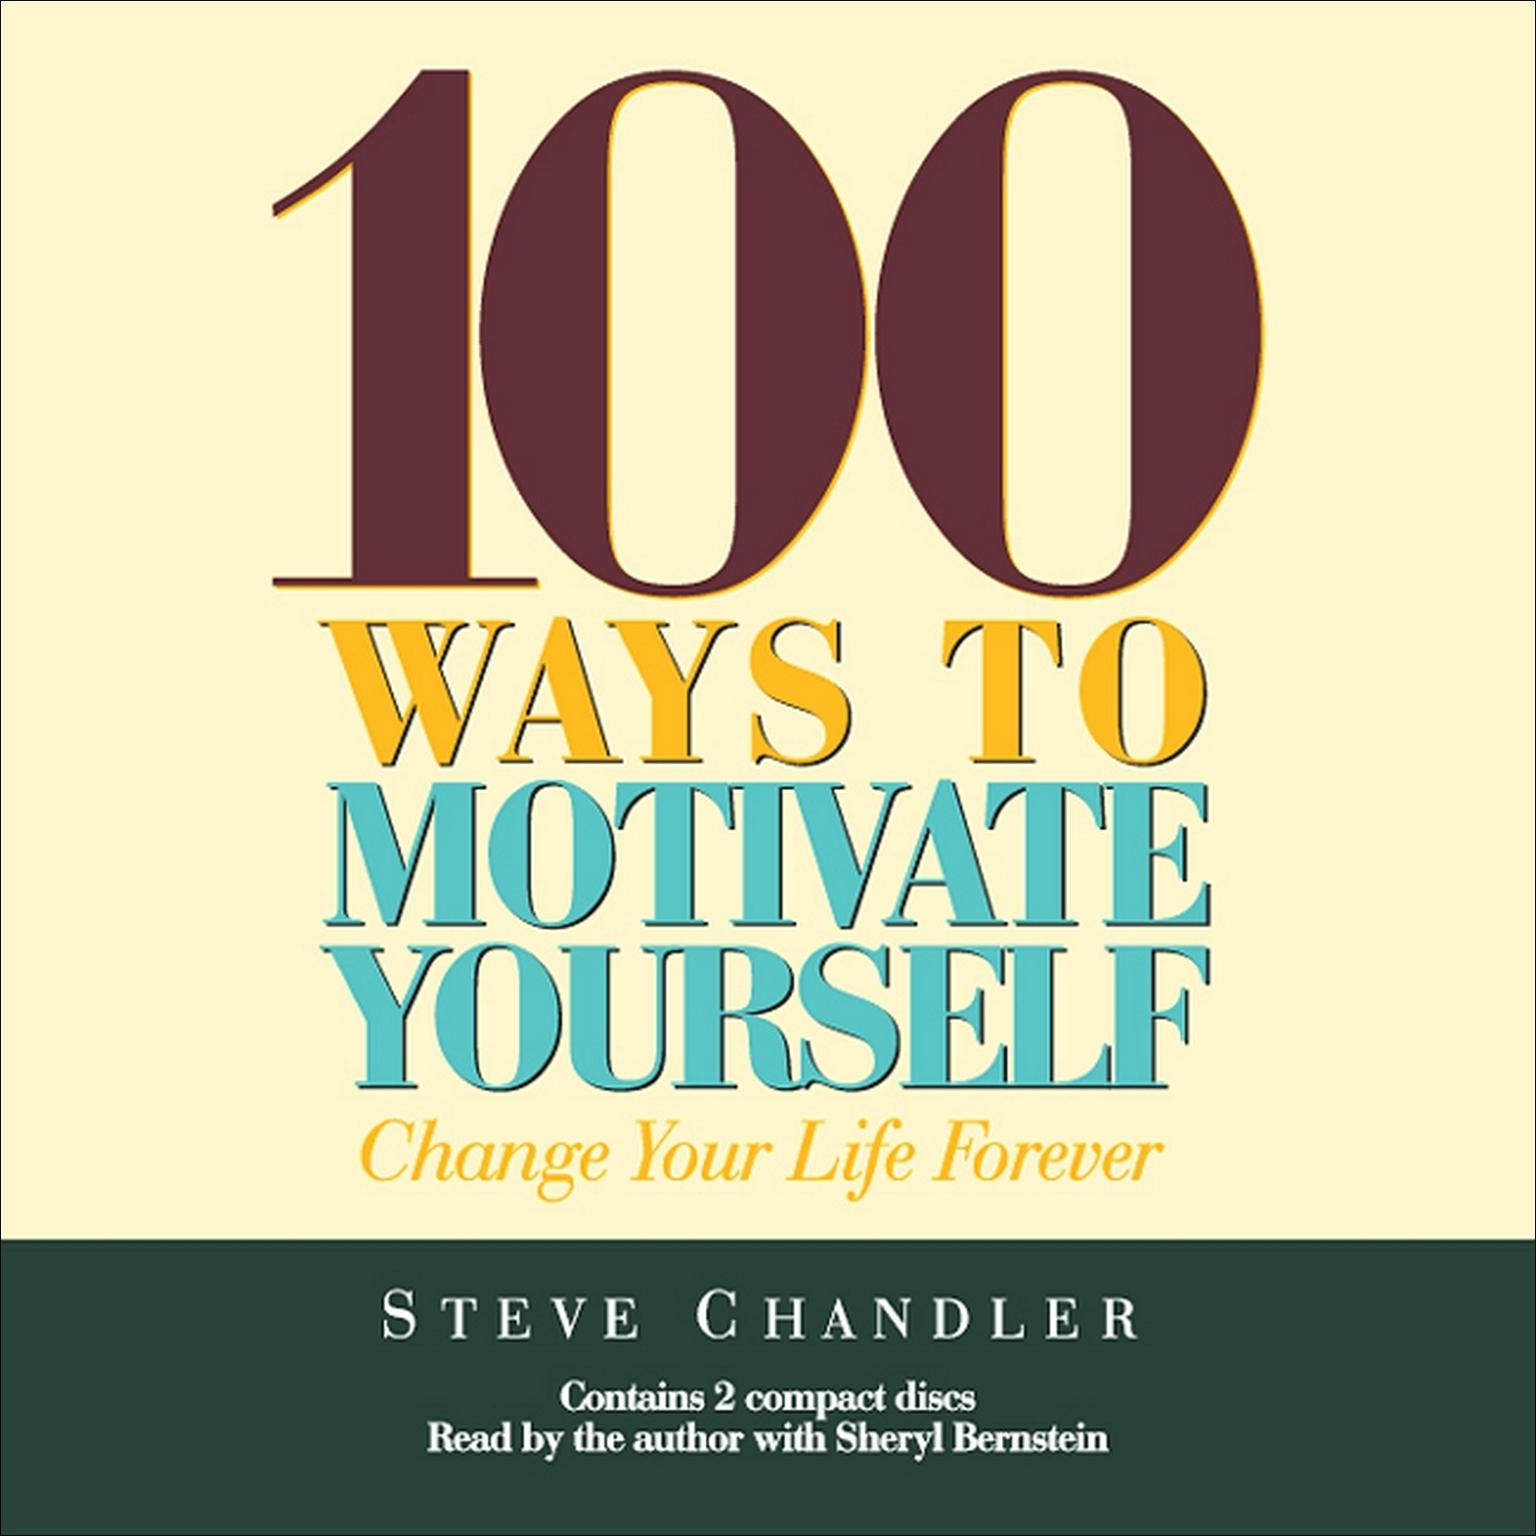 100 Ways to Motivate Yourself (Abridged): Change Your Life Forever Audiobook, by Steve Chandler